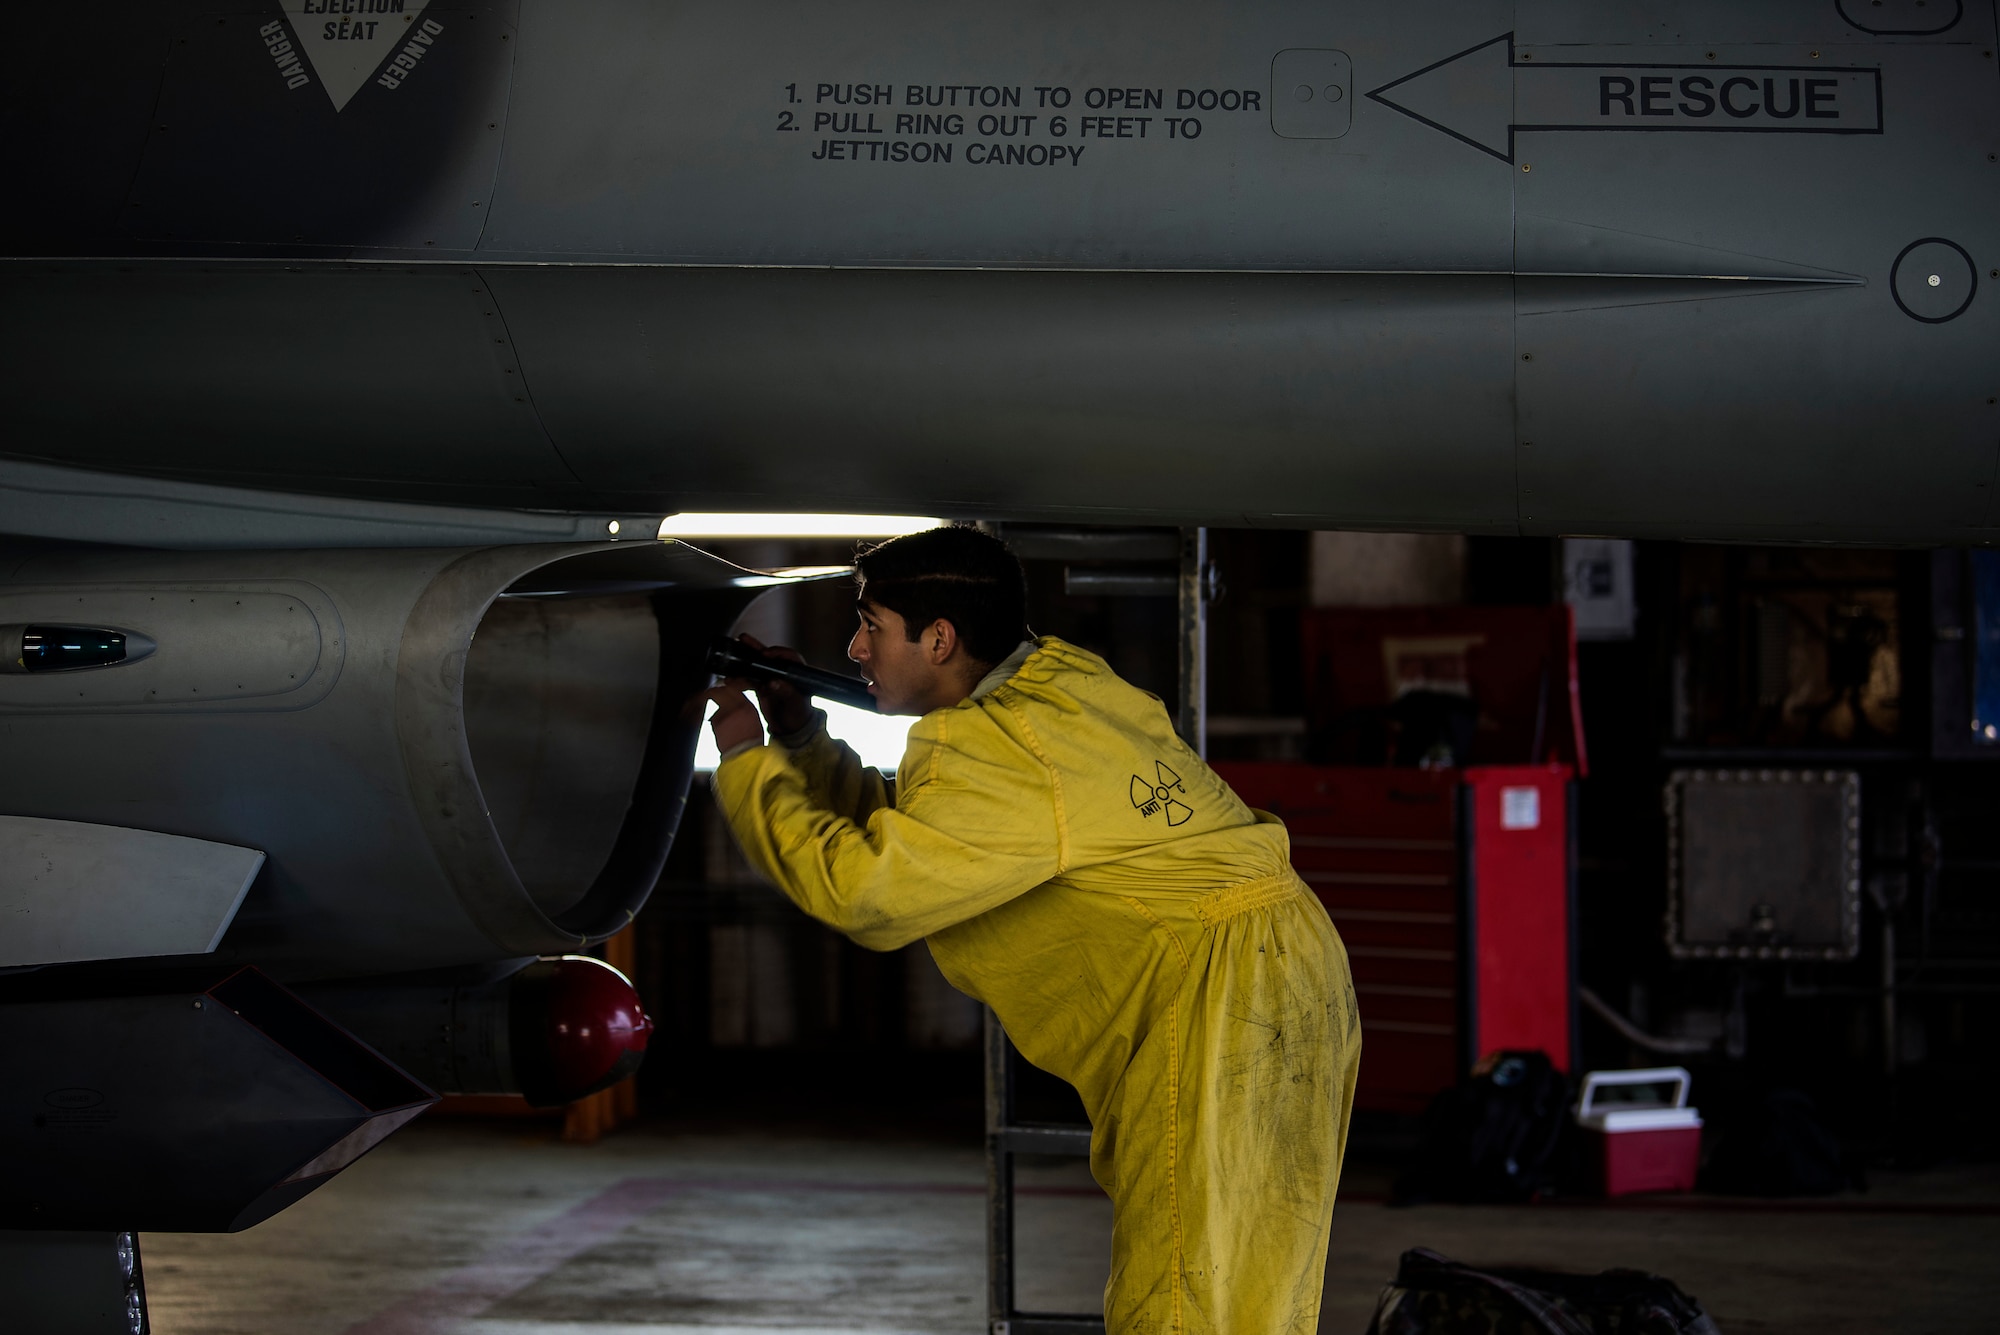 U.S. Air Force Staff Sgt. Martin Perez, 52nd Aircraft Maintenance Squadron tactical aircraft maintainer, inspects an F-16 Fighting Falcon intake at Spangdahlem Air Base, Germany, Sept. 13, 2018. Inspections are conducted after each flight to ensure there are no foreign objects, damage, or fuel leaks in the intake. (U.S. Air Force photo by Airman 1st Class Valerie Seelye)